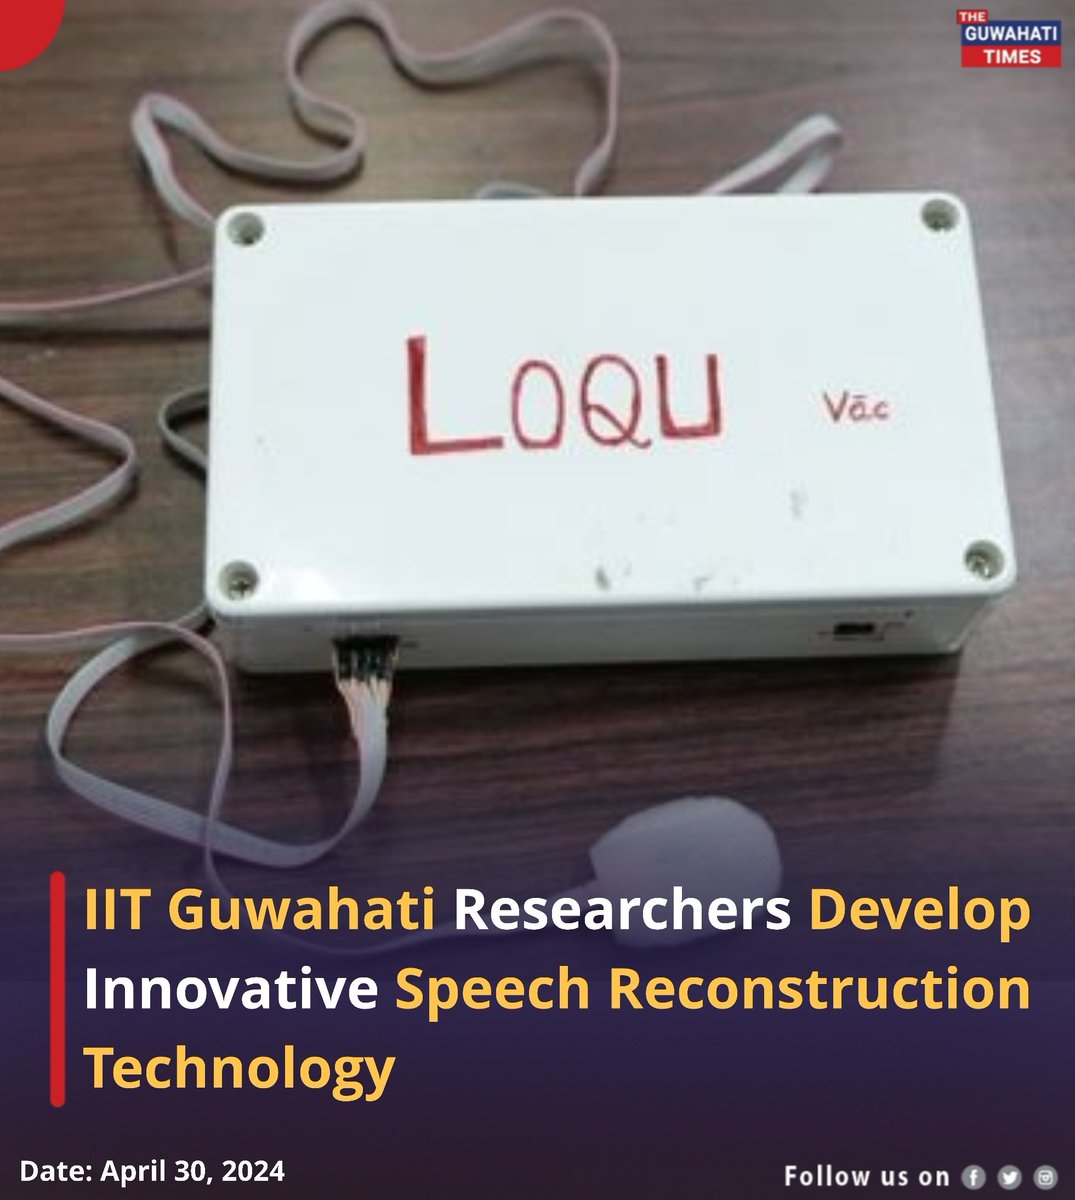 IIT Guwahati have achieved a significant breakthrough in the field of speech technology with the development and patenting of 'LOQU', a novel method to generate human speech signals directly from vocal cord vibration signals.

Read more: facebook.com/share/p/SE1qRE…